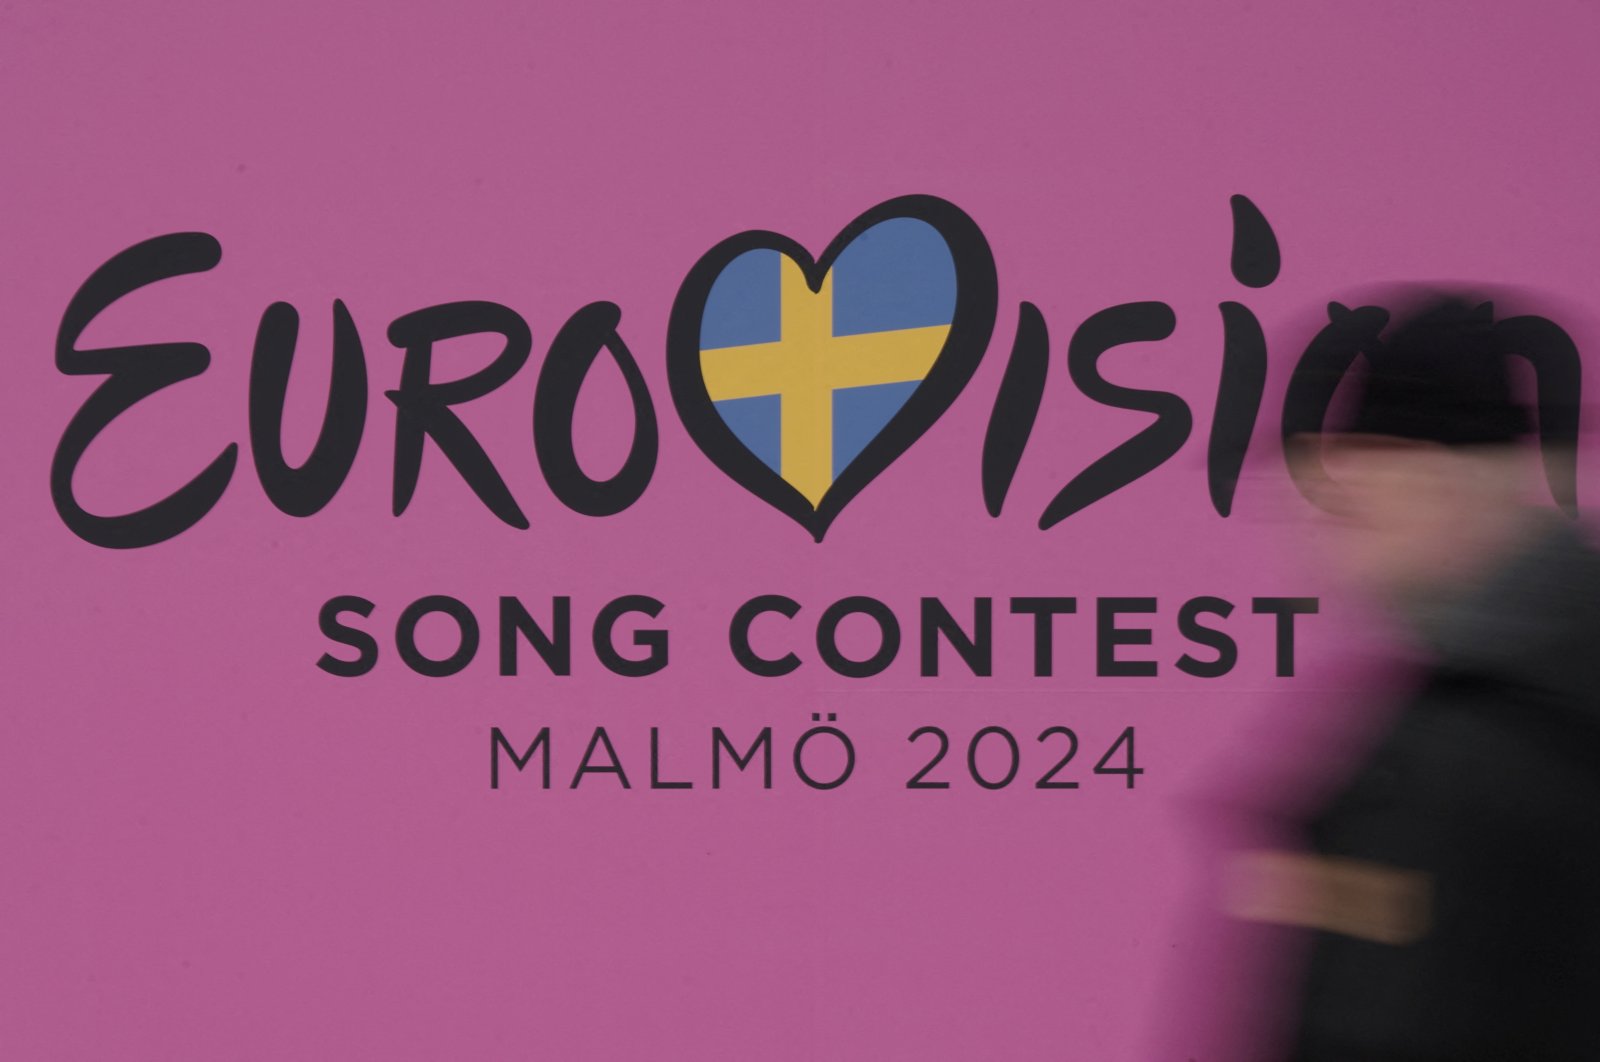 A person walks past a sign for the 2024 Eurovision Song Contest in Malmo, Sweden, April 17, 2024. (Reuters Photo)